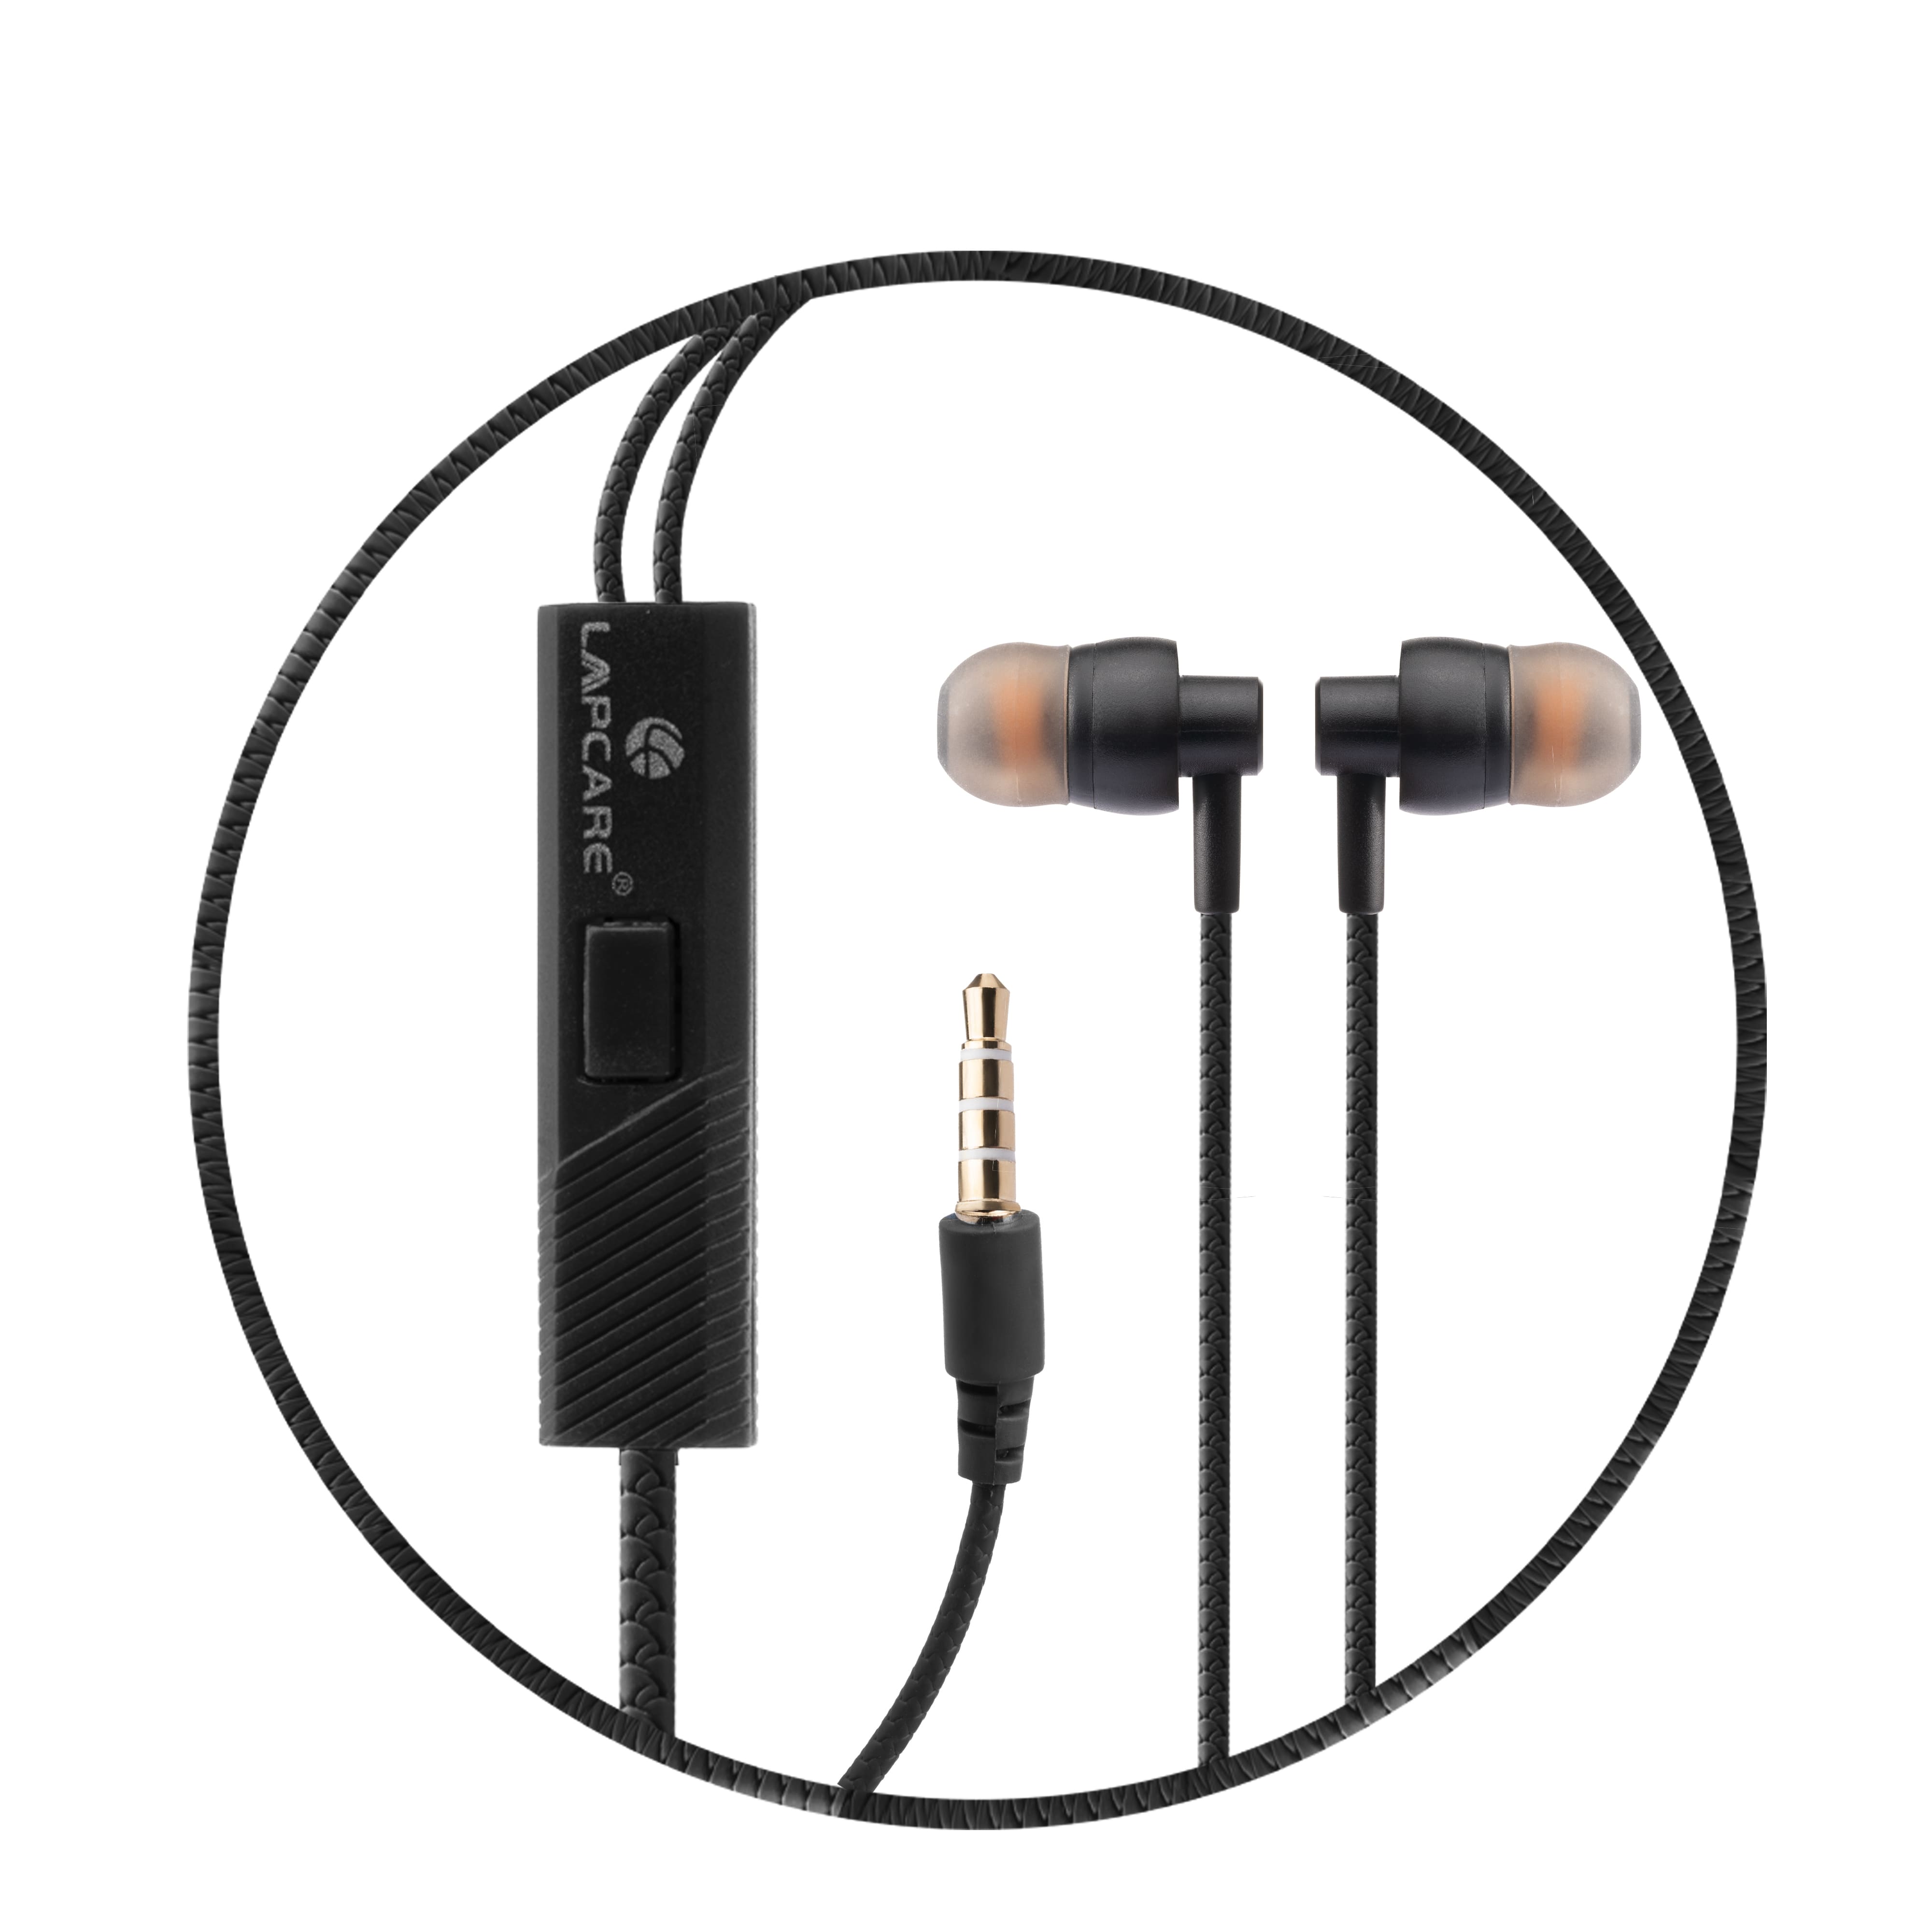 Lapcare WOOBUDS V wired Earbuds with inbuilt MIC -Black (LBD-303)